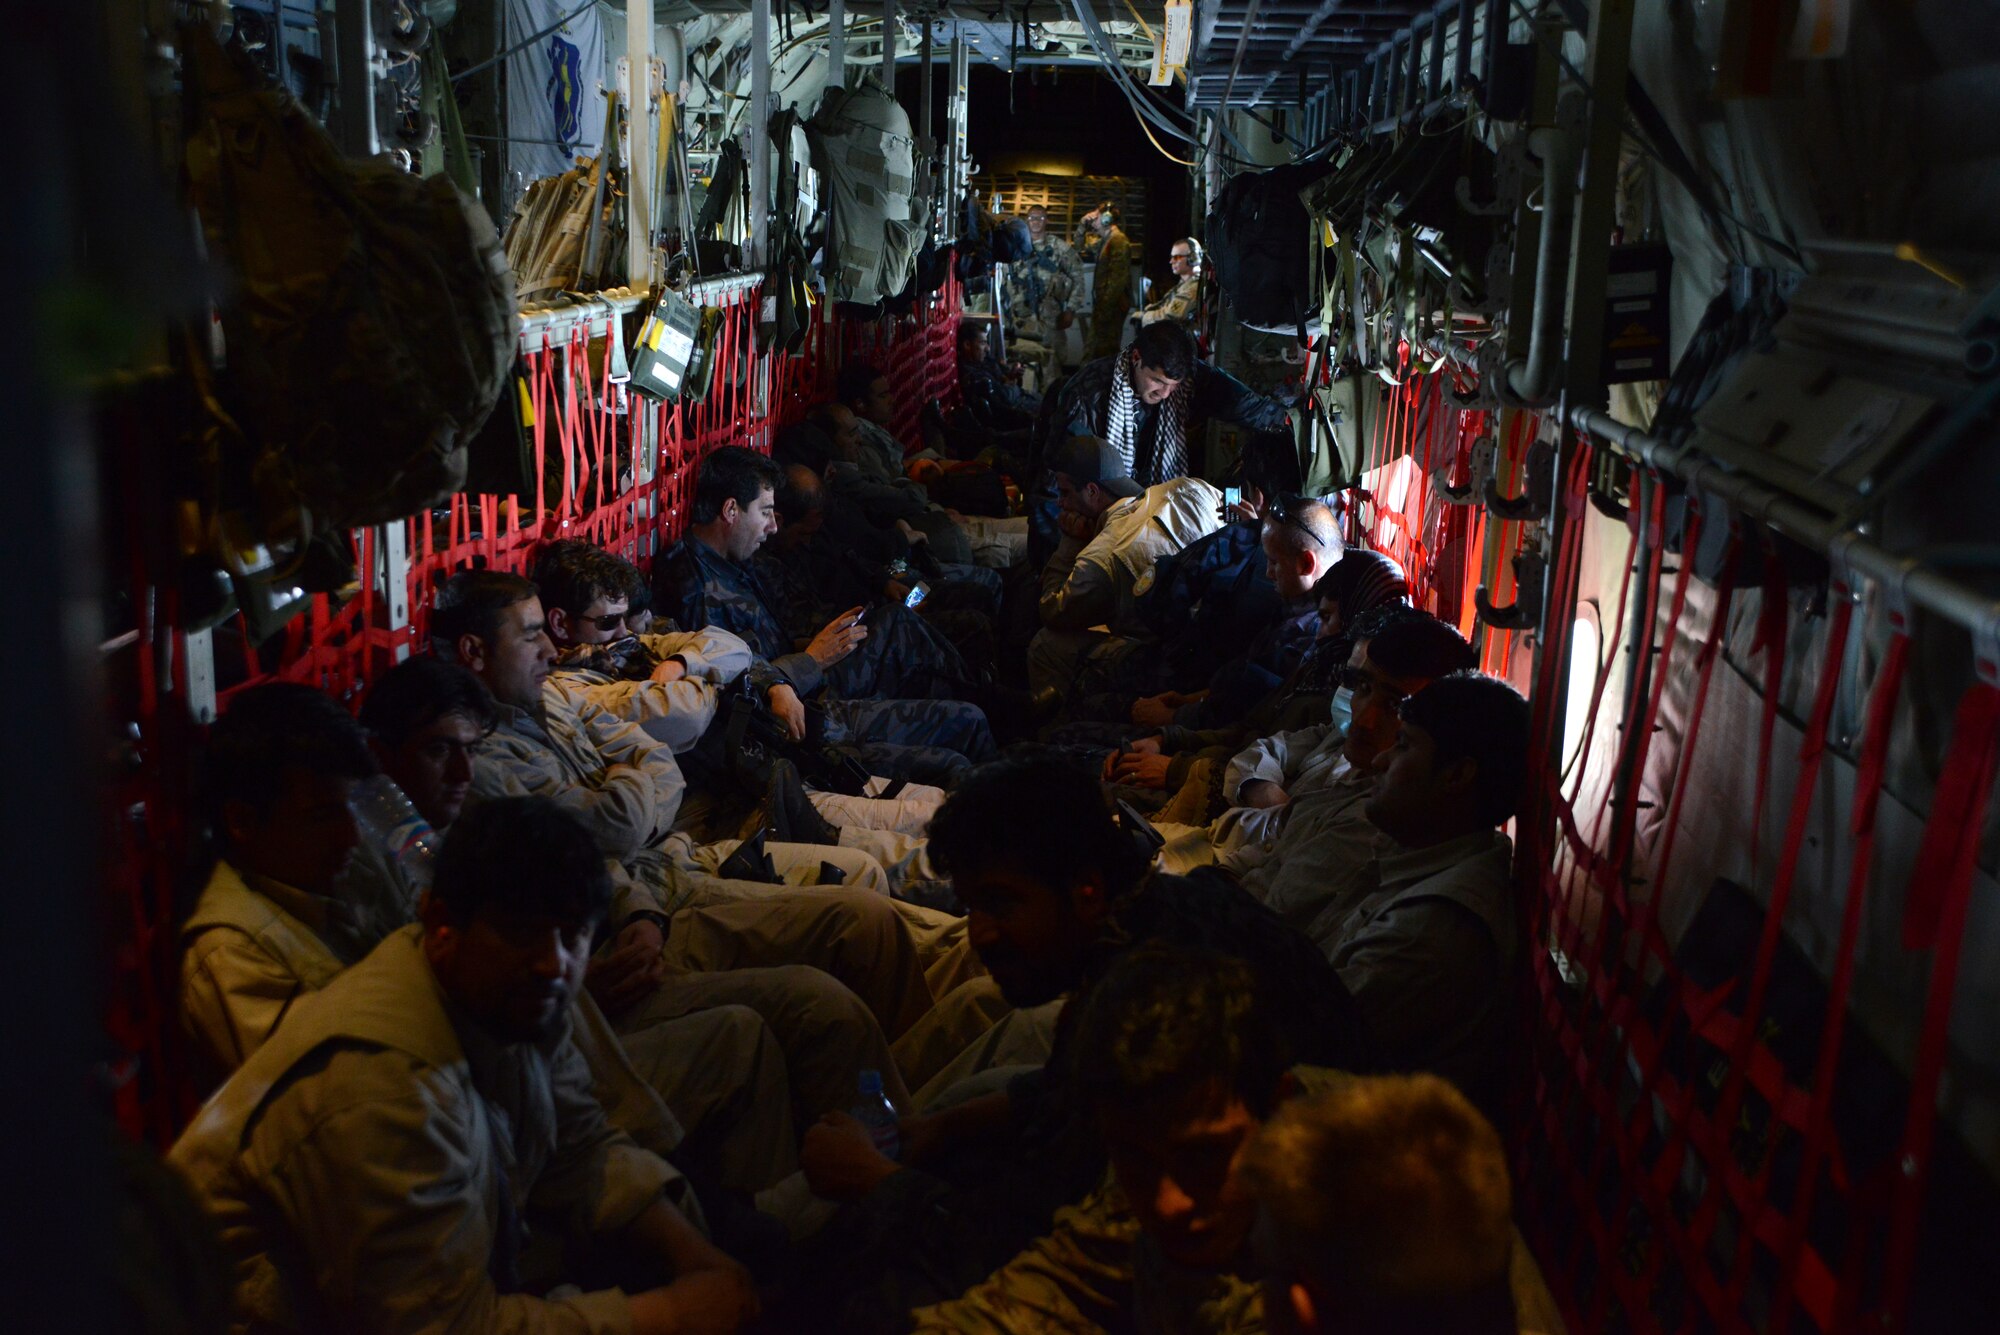 KABUL INTERNATIONAL AIRPORT, Afghanistan – Afghan National Army soldiers and advisors relax as they fly aboard a C-130 J-30 assigned to the 774th Expeditionary Airlift Squadron, 455th Air Expeditionary Wing May 5, 2014. The team was flown to Fayzabad Airport by Coalition Forces so they could make their way to the Badakhshan province, which experienced a mudslide May 2 that is responsible for the loss of lives and damages of a village. (U.S. Air Force photo by Master Sgt. Cohen A. Young)